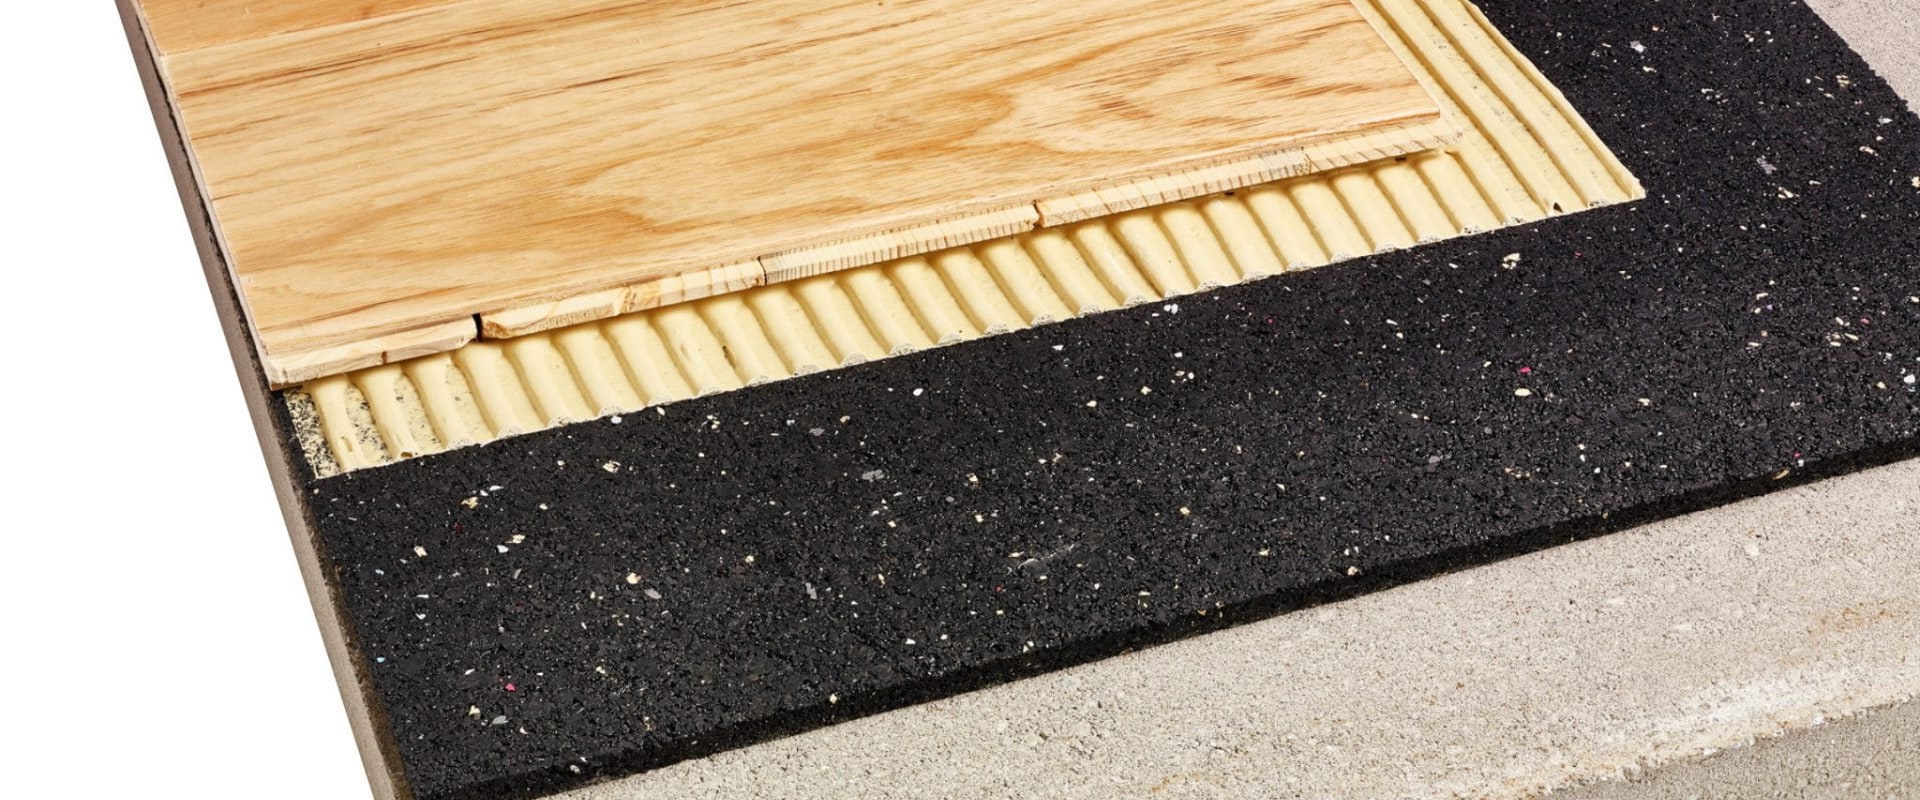 Does Underlay Reduce Noise? An Expert's Perspective